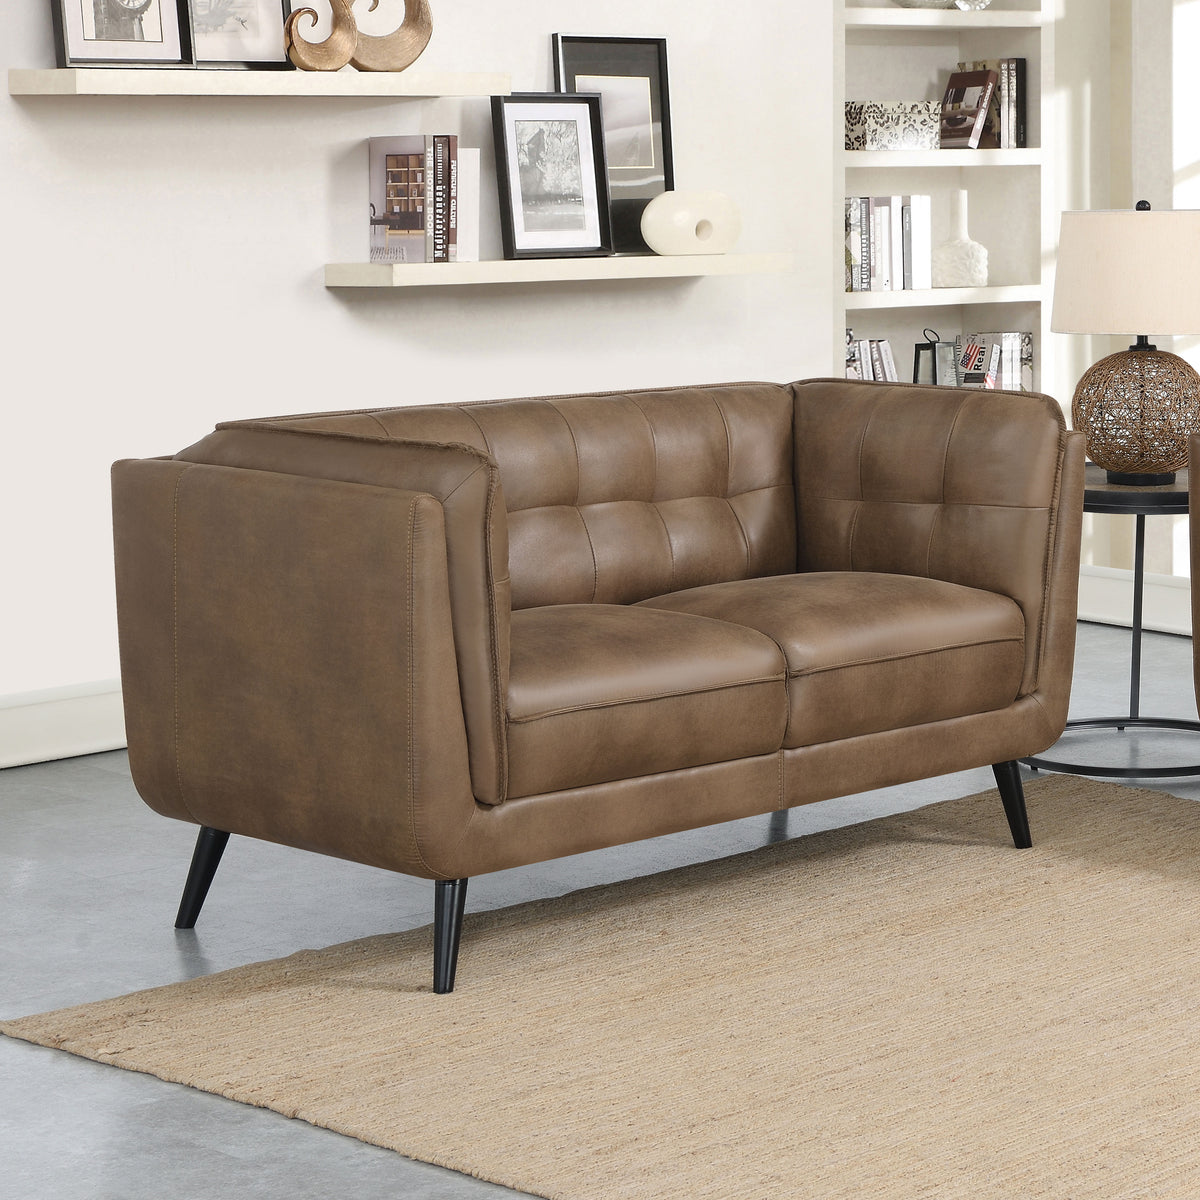 Thatcher Upholstered Button Tufted Loveseat Brown Thatcher Upholstered Button Tufted Loveseat Brown Half Price Furniture